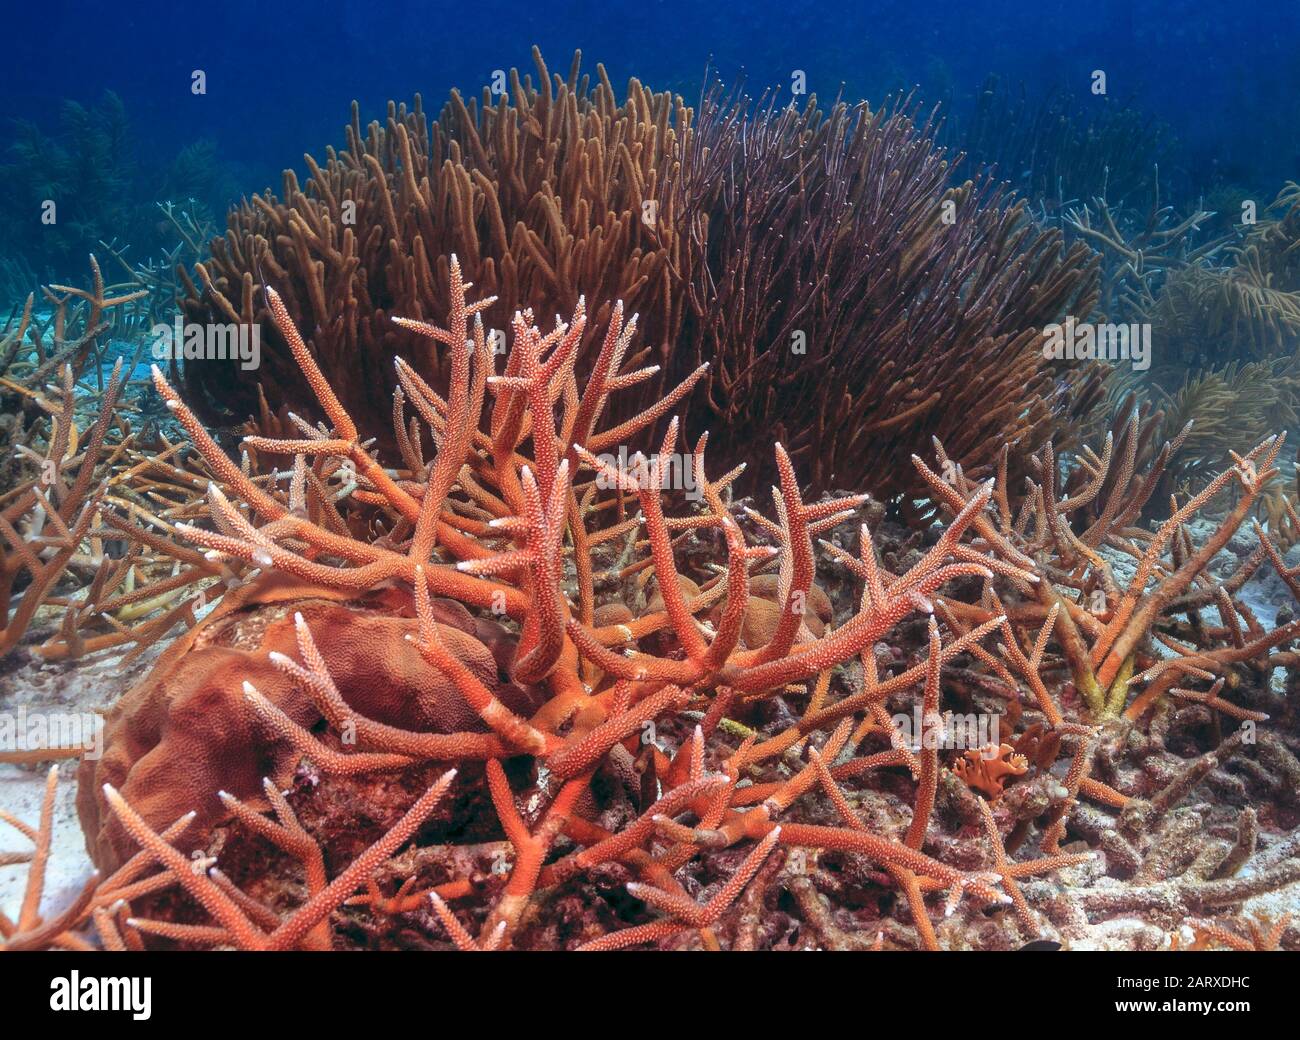 Caribbean coral reef staghorn in closeup Stock Photo - Alamy